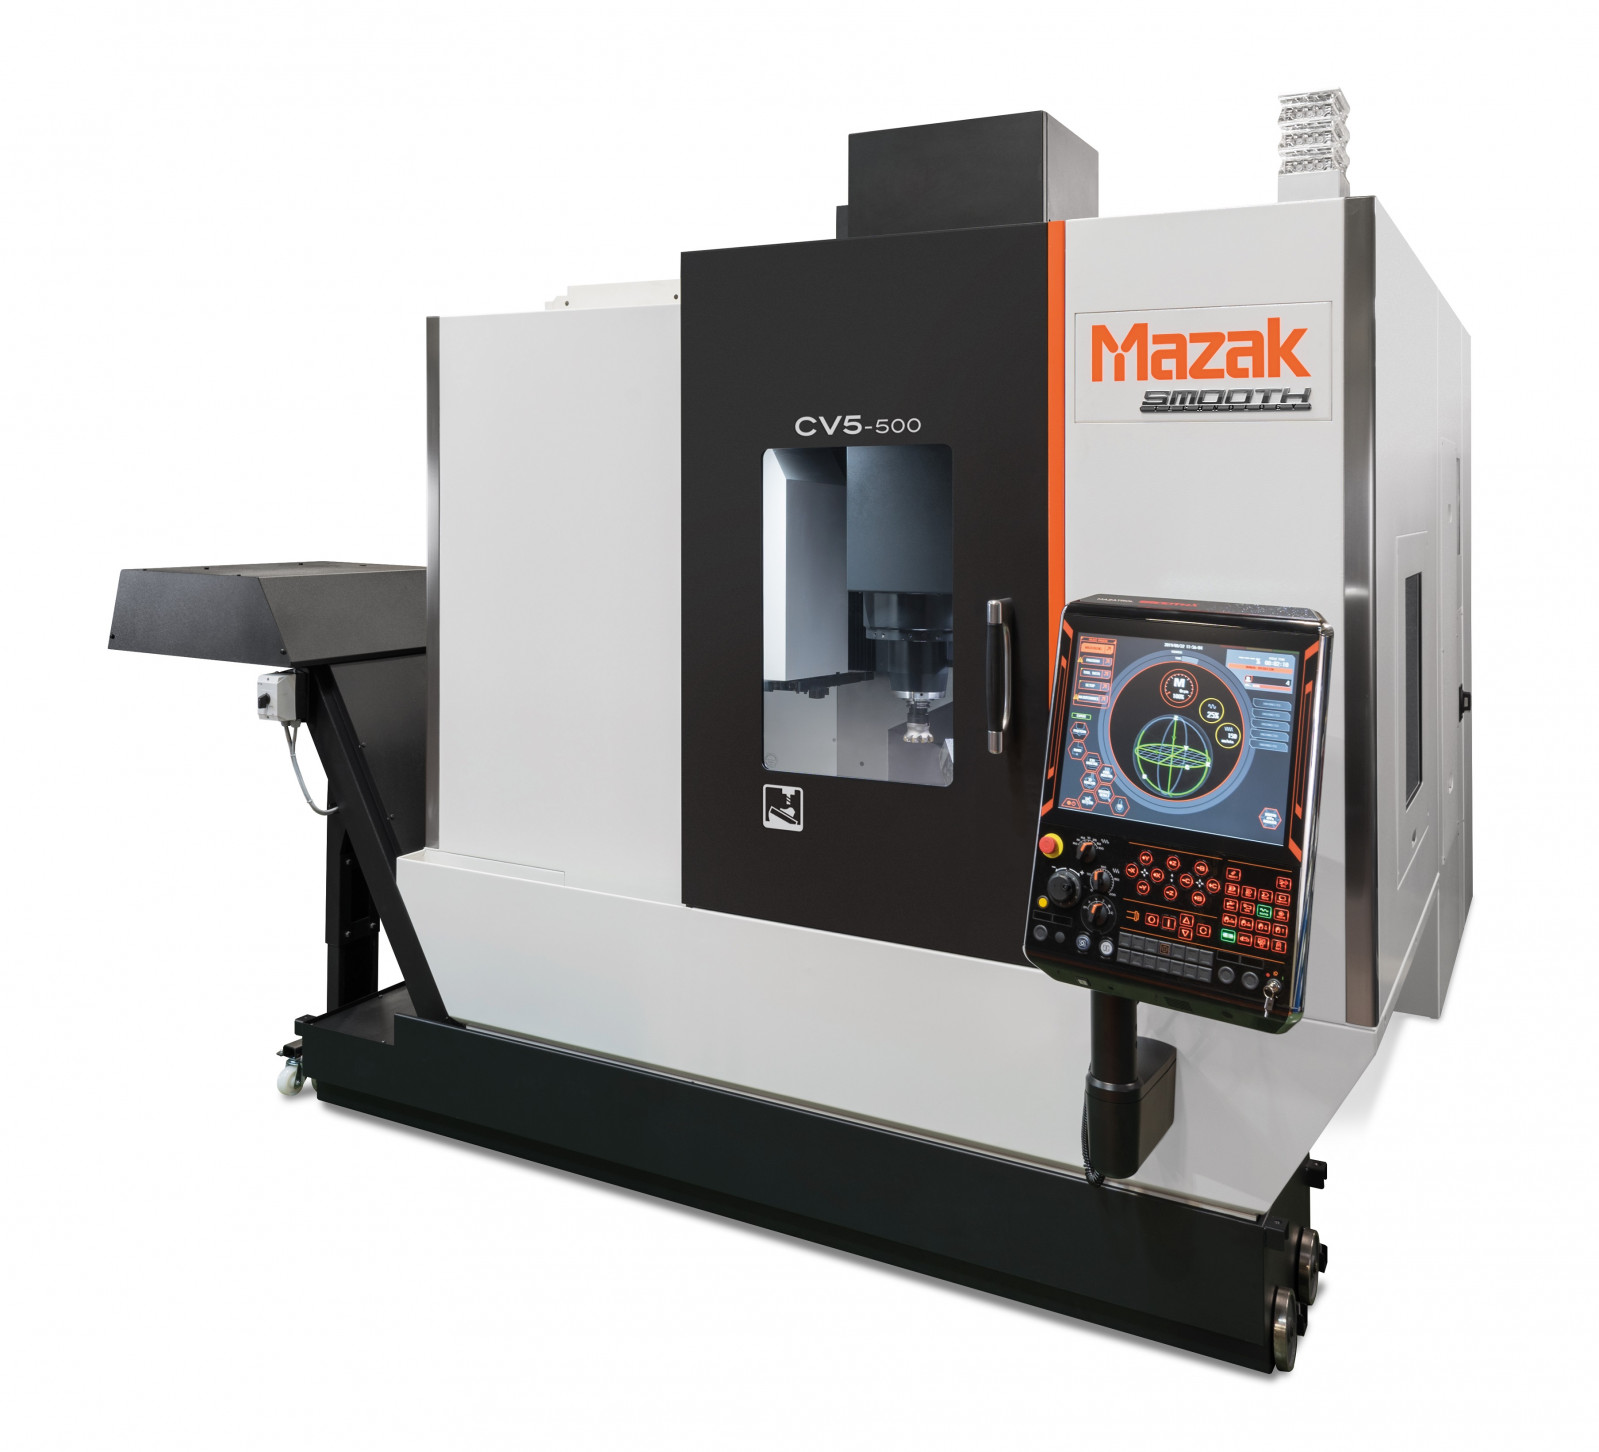 New UK manufactured 5-axis machine to debut at EMO...